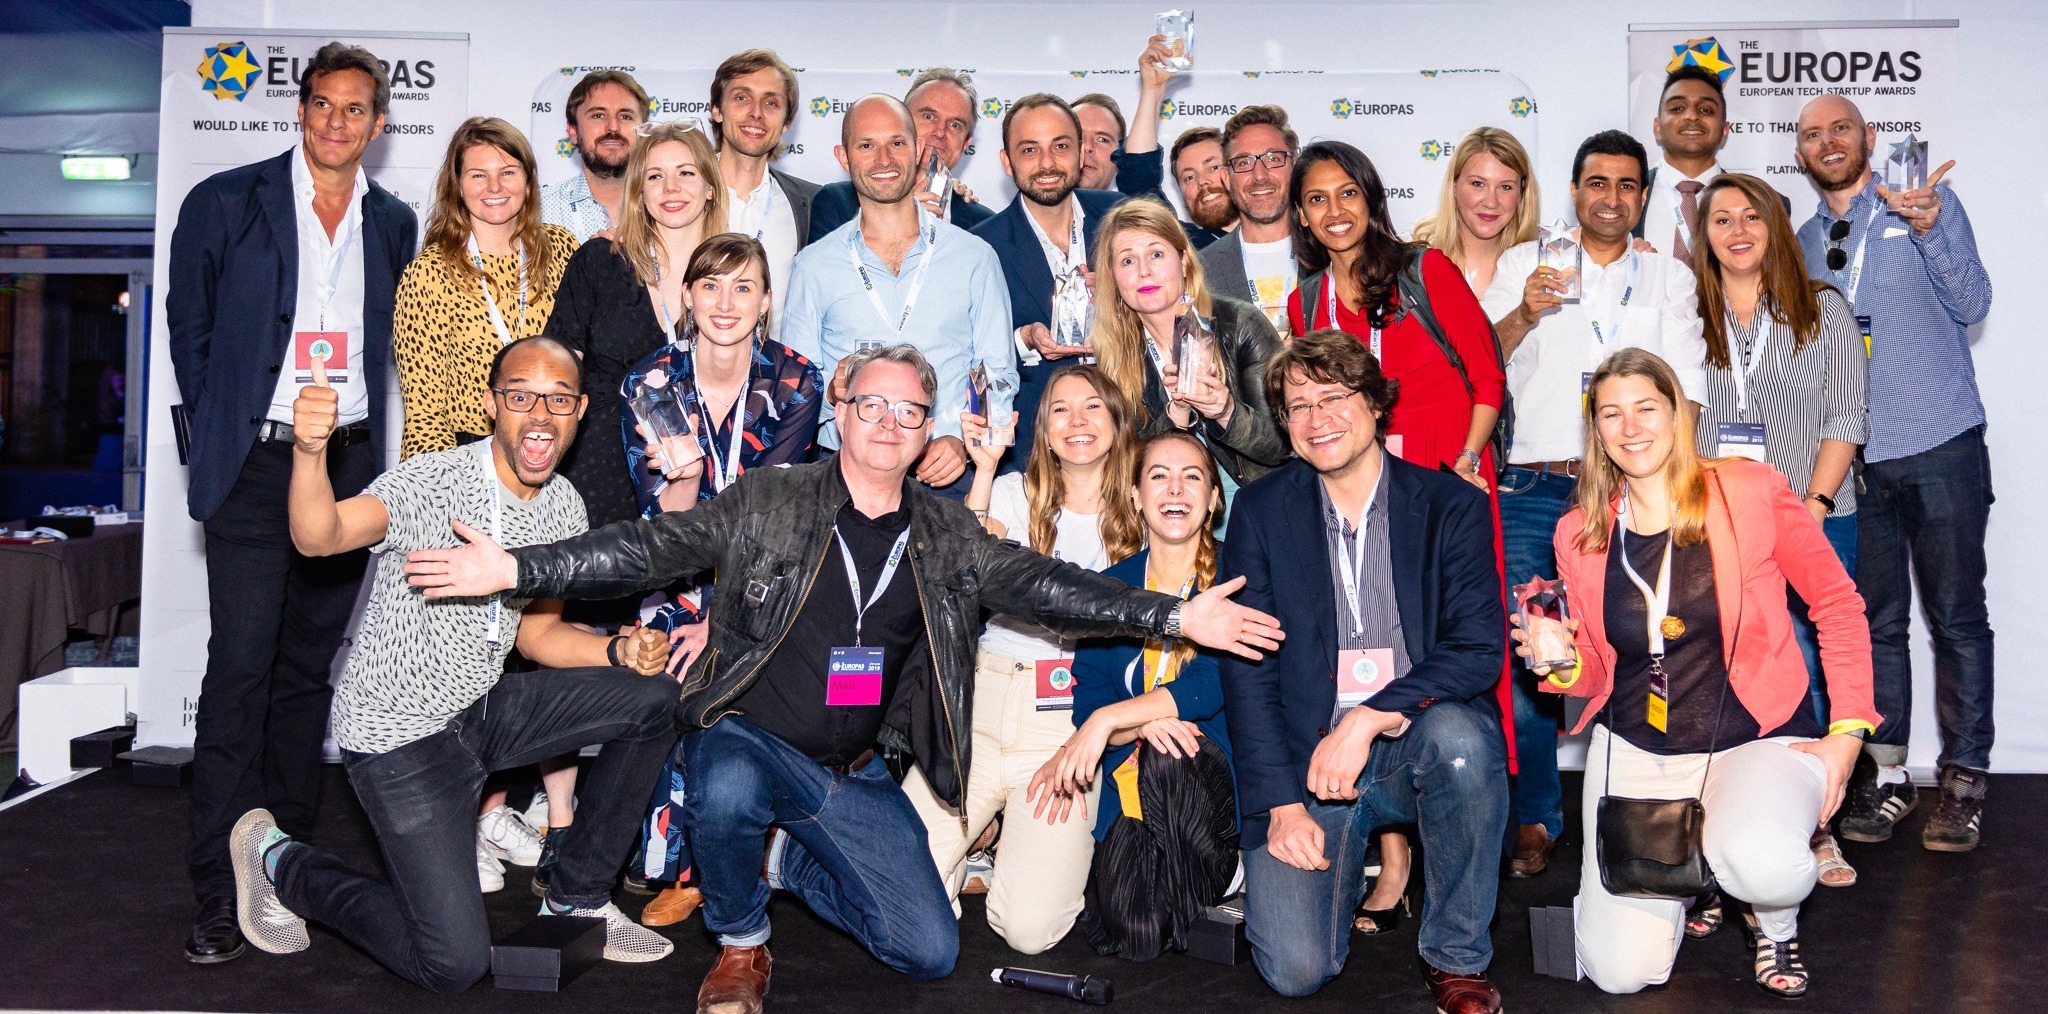 The winners of The Europas Awards 2019 display Europe’s continuing diversity and ambition